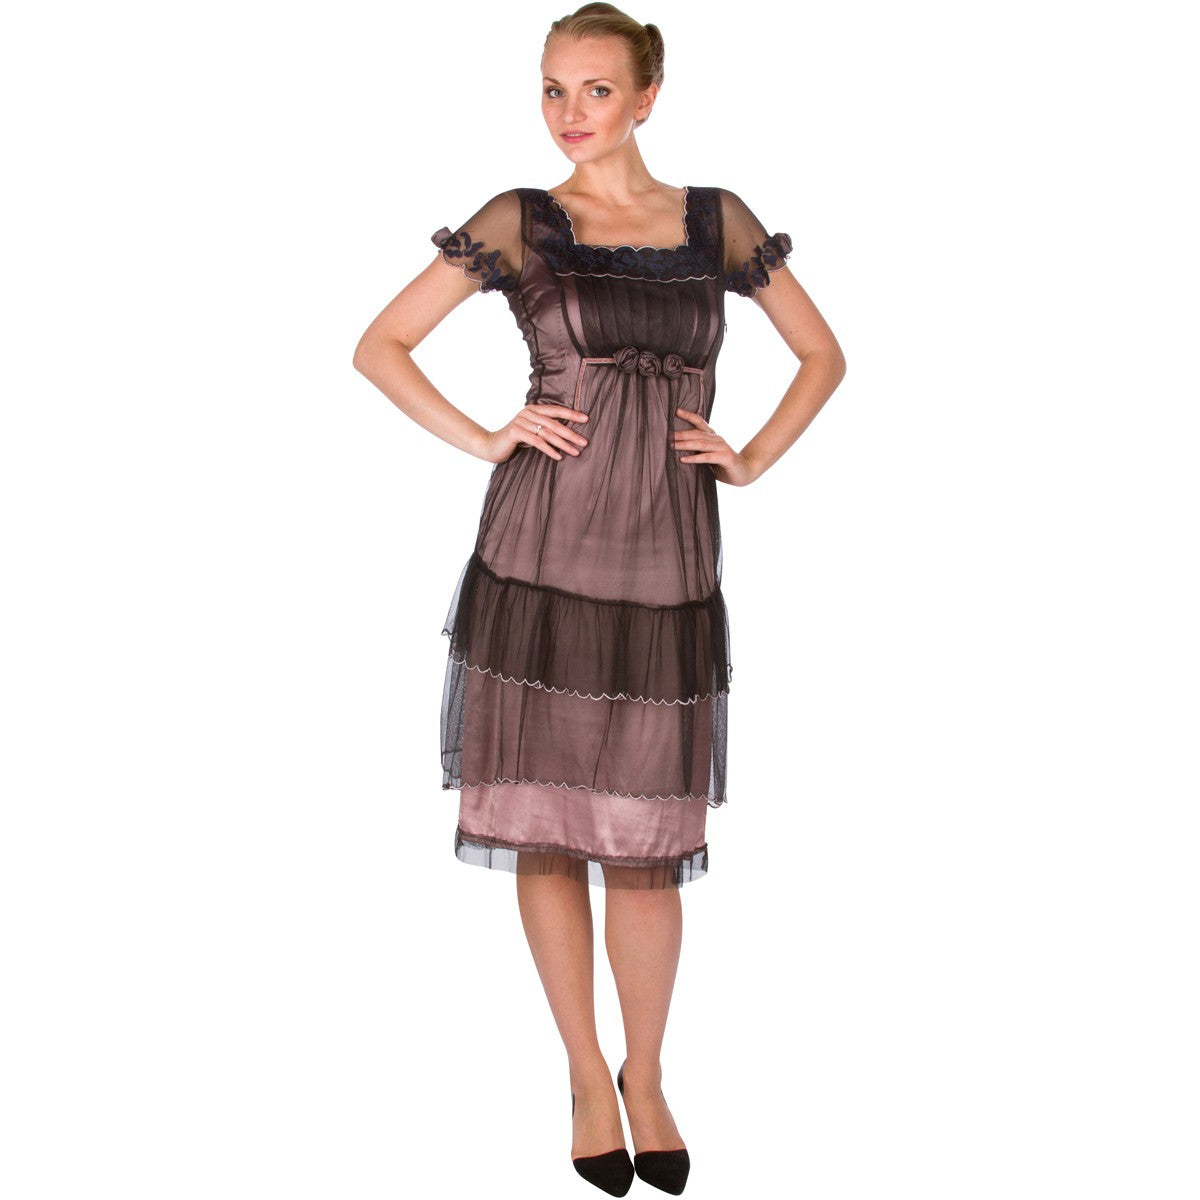 Flirty Vintage Inspired Party Dress in Smocky Rose by Nataya - SOLD OUT